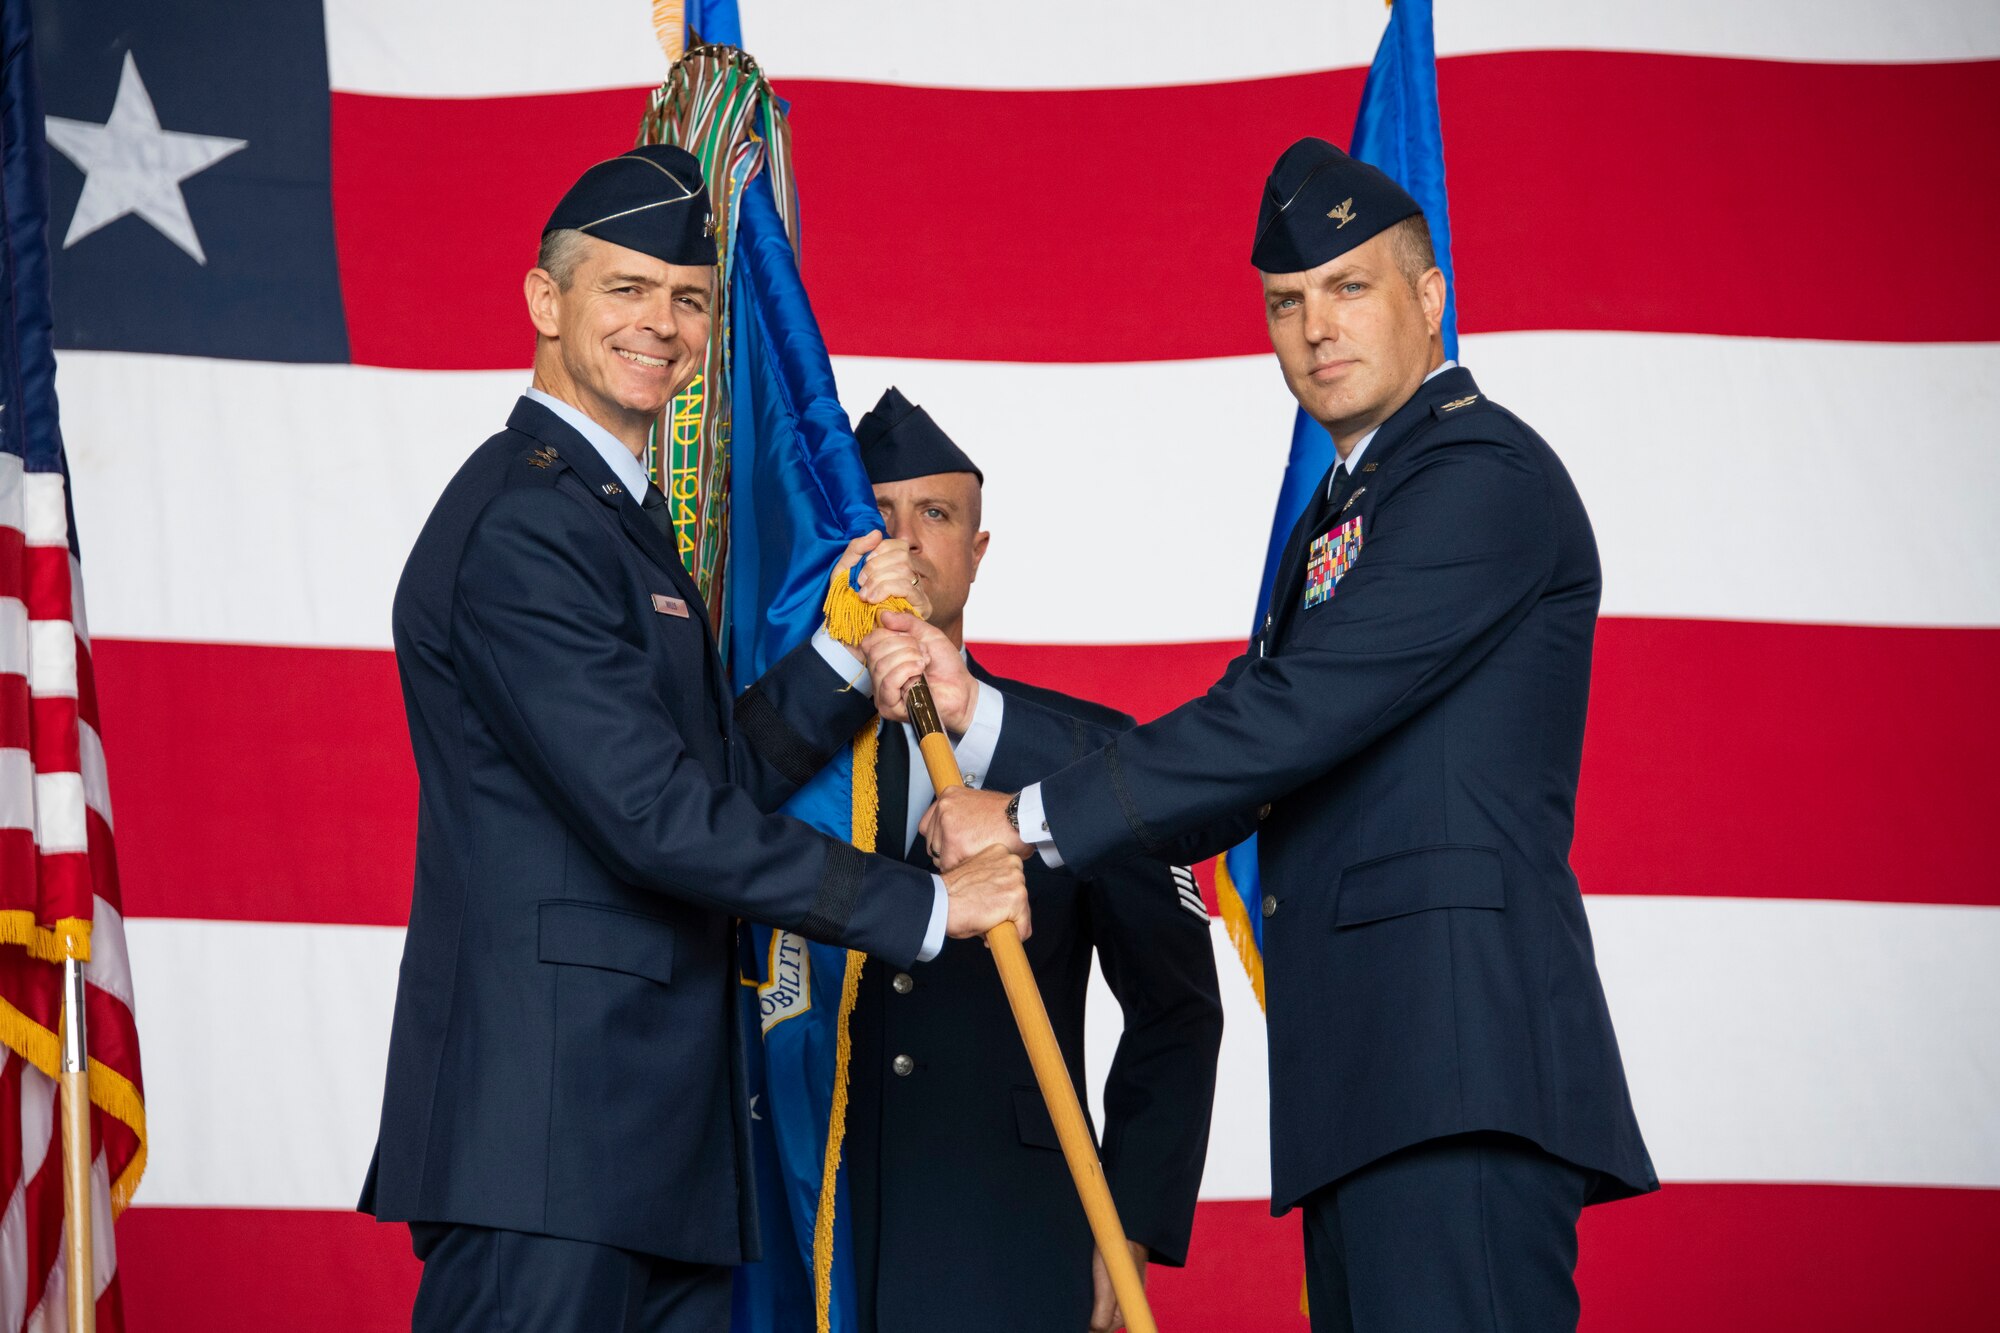 U.S. Air Force Maj. Gen. Craig Wills, 19th Air Force commander, passes the guidon to U.S. Air Force Col. Matthew Leard, 97th Air Mobility Wing commander, during the 97th AMW change of command ceremony, June 21, 2019, at Altus Air Force Base, Okla. Leard assumed command from U.S. Air Force Col. Eric Carney and is responsible for the formal training of all KC-135 Stratotanker, C-17 Globemaster III and KC-46 Pegasus aircrews for active duty, Air National Guard, Air Force Reserve units as well as multiple partner air forces from across the world. (U.S. Air Force photo by Airman 1st Class Breanna Klemm)